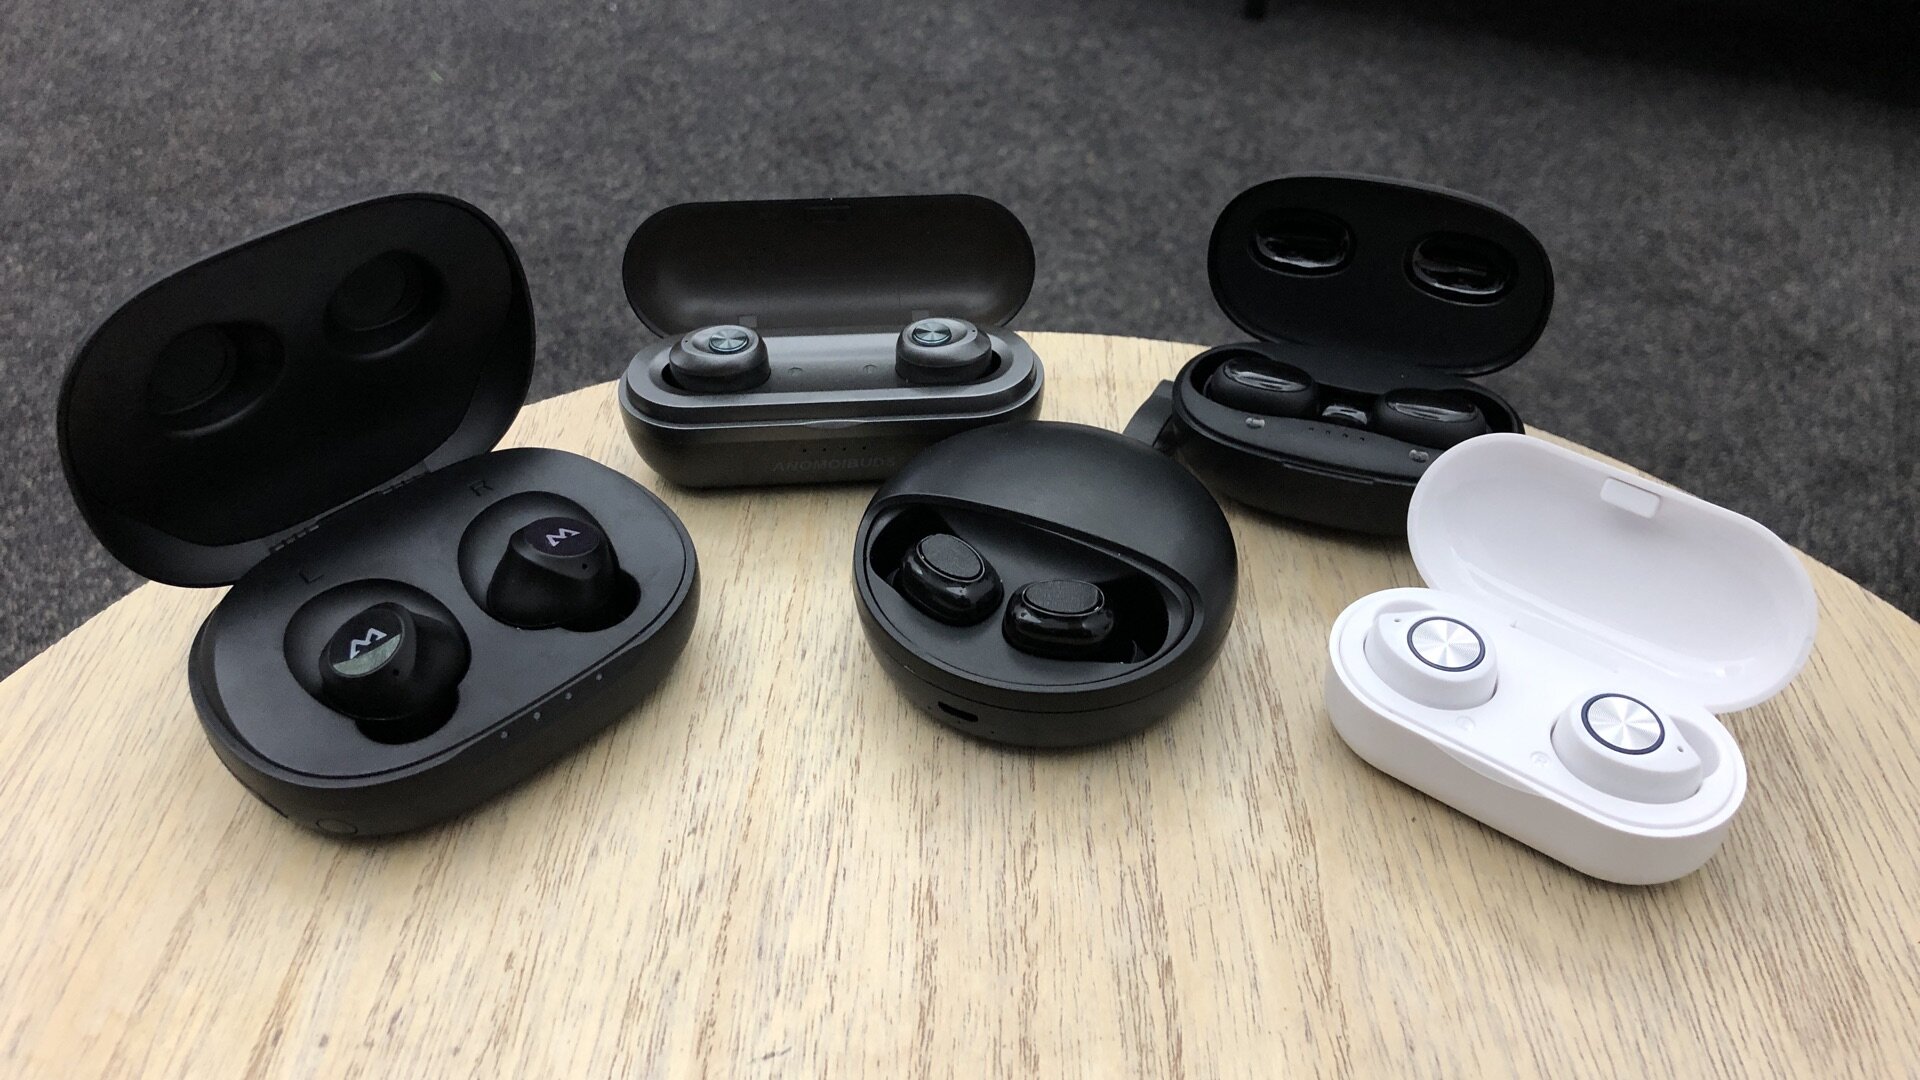 længes efter Standard hår Review round: Syllable S101, Mpow M20, Tiso i6, and TW60 TWS